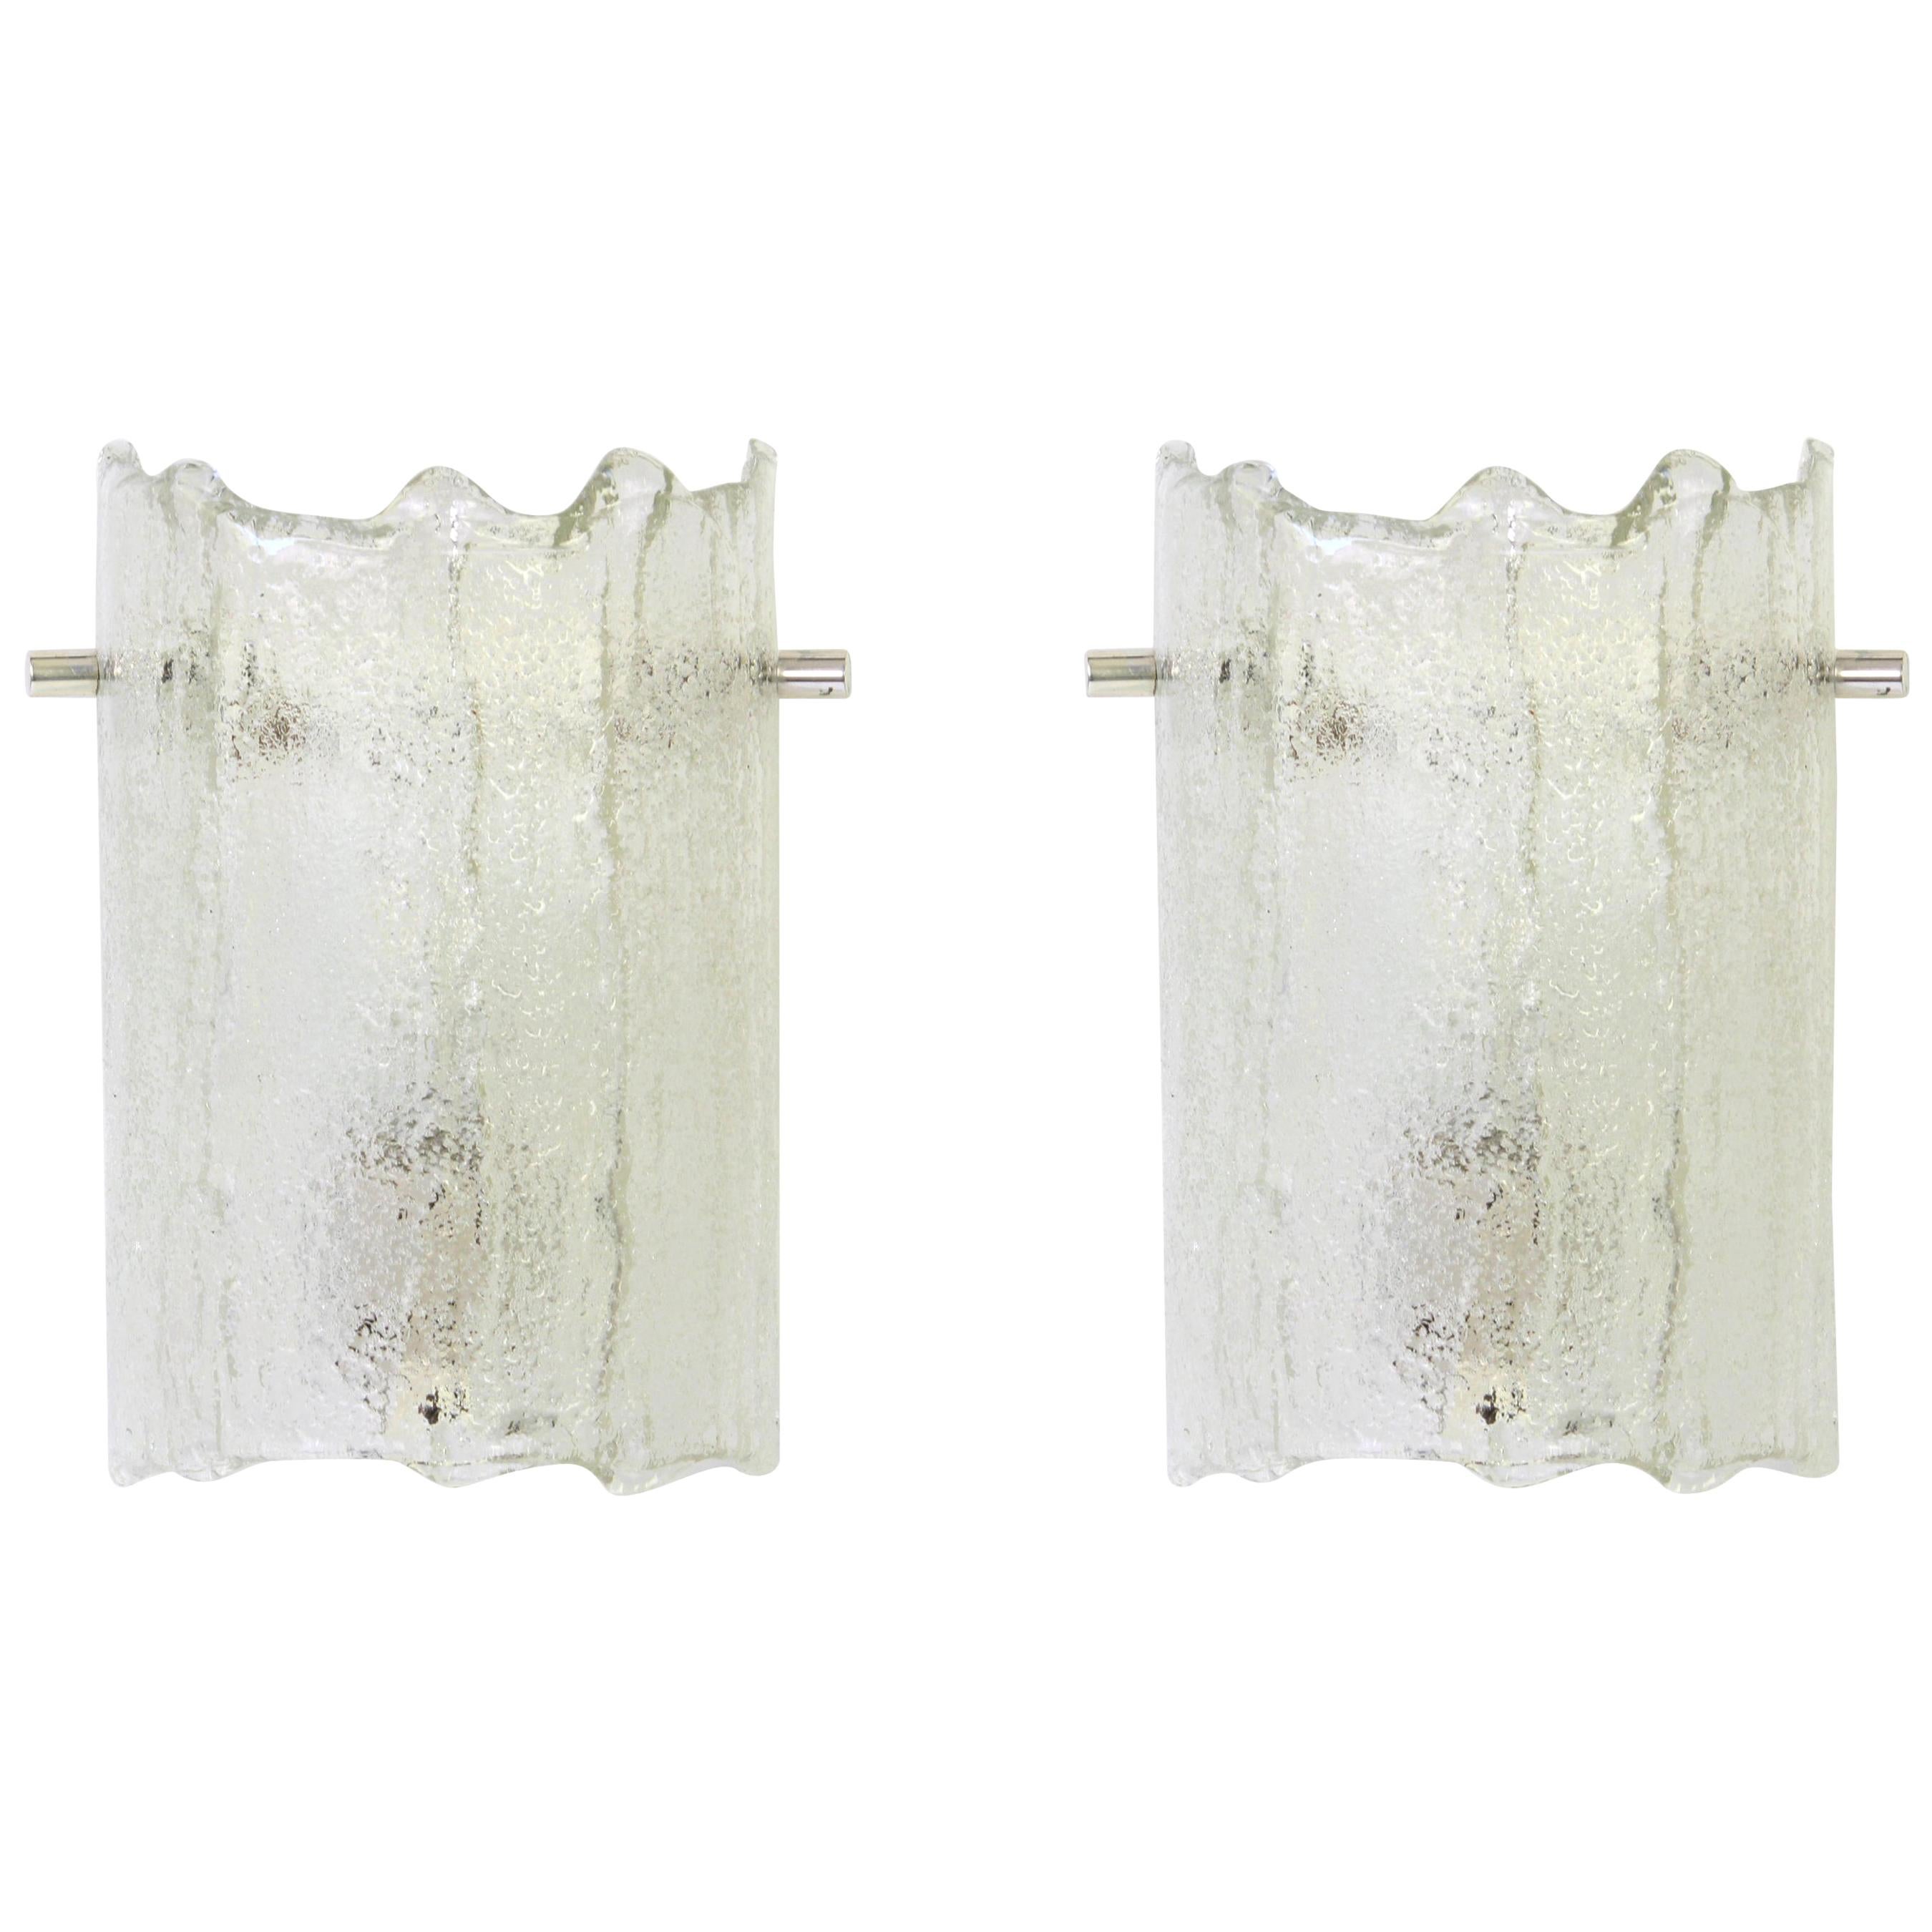 Gorgeous pair of Murano glass sconces by Kaiser Leuchten, Germany, circa 1970s.

Heavy quality and in very good condition. Cleaned, well-wired and ready to use. 

Each fixture requires one E14 small bulb with 40W max each and compatible with the